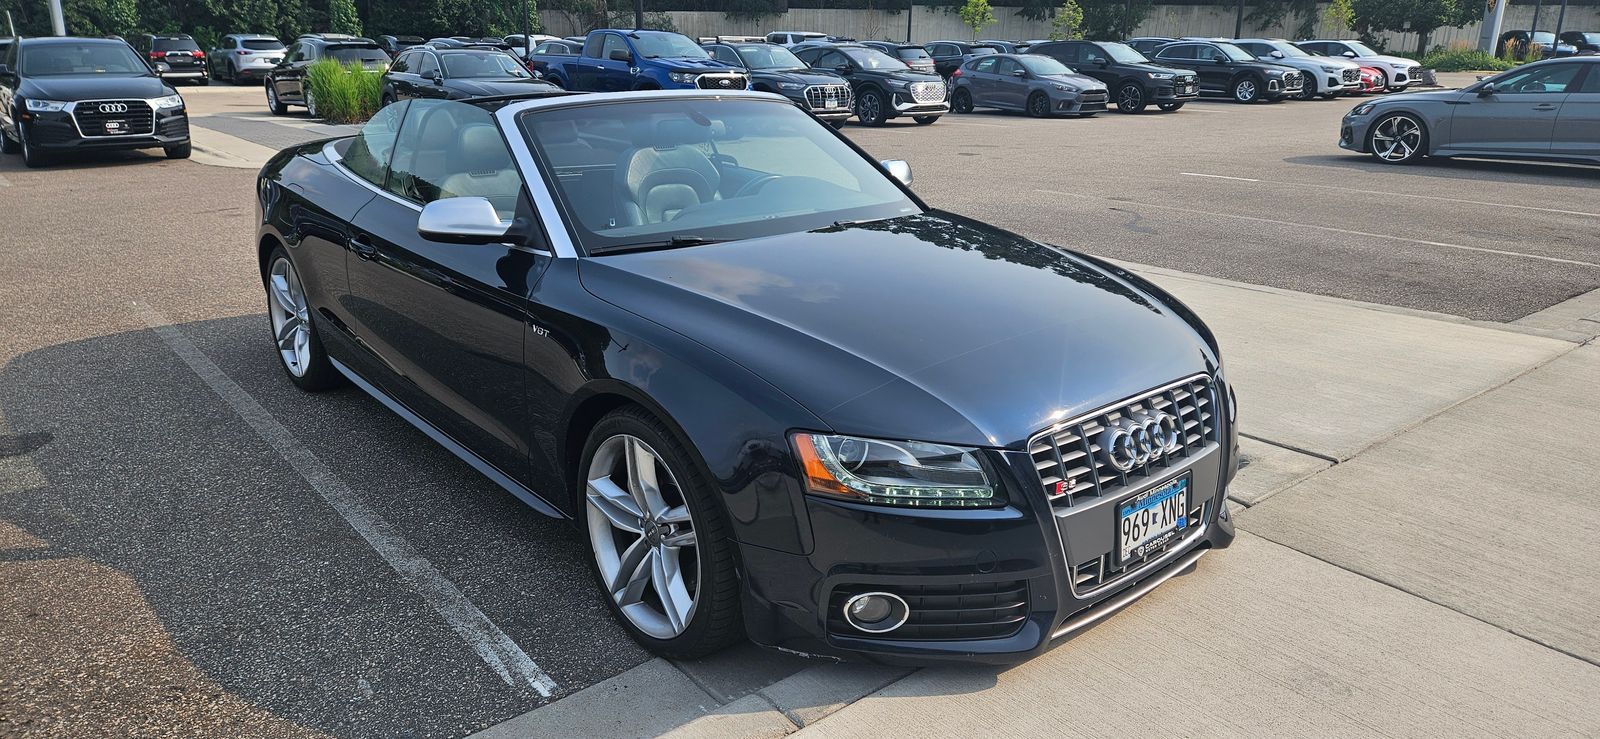 Used 2011 Audi S5 Premium Plus with VIN WAUVGAFH1BN008745 for sale in Minneapolis, Minnesota